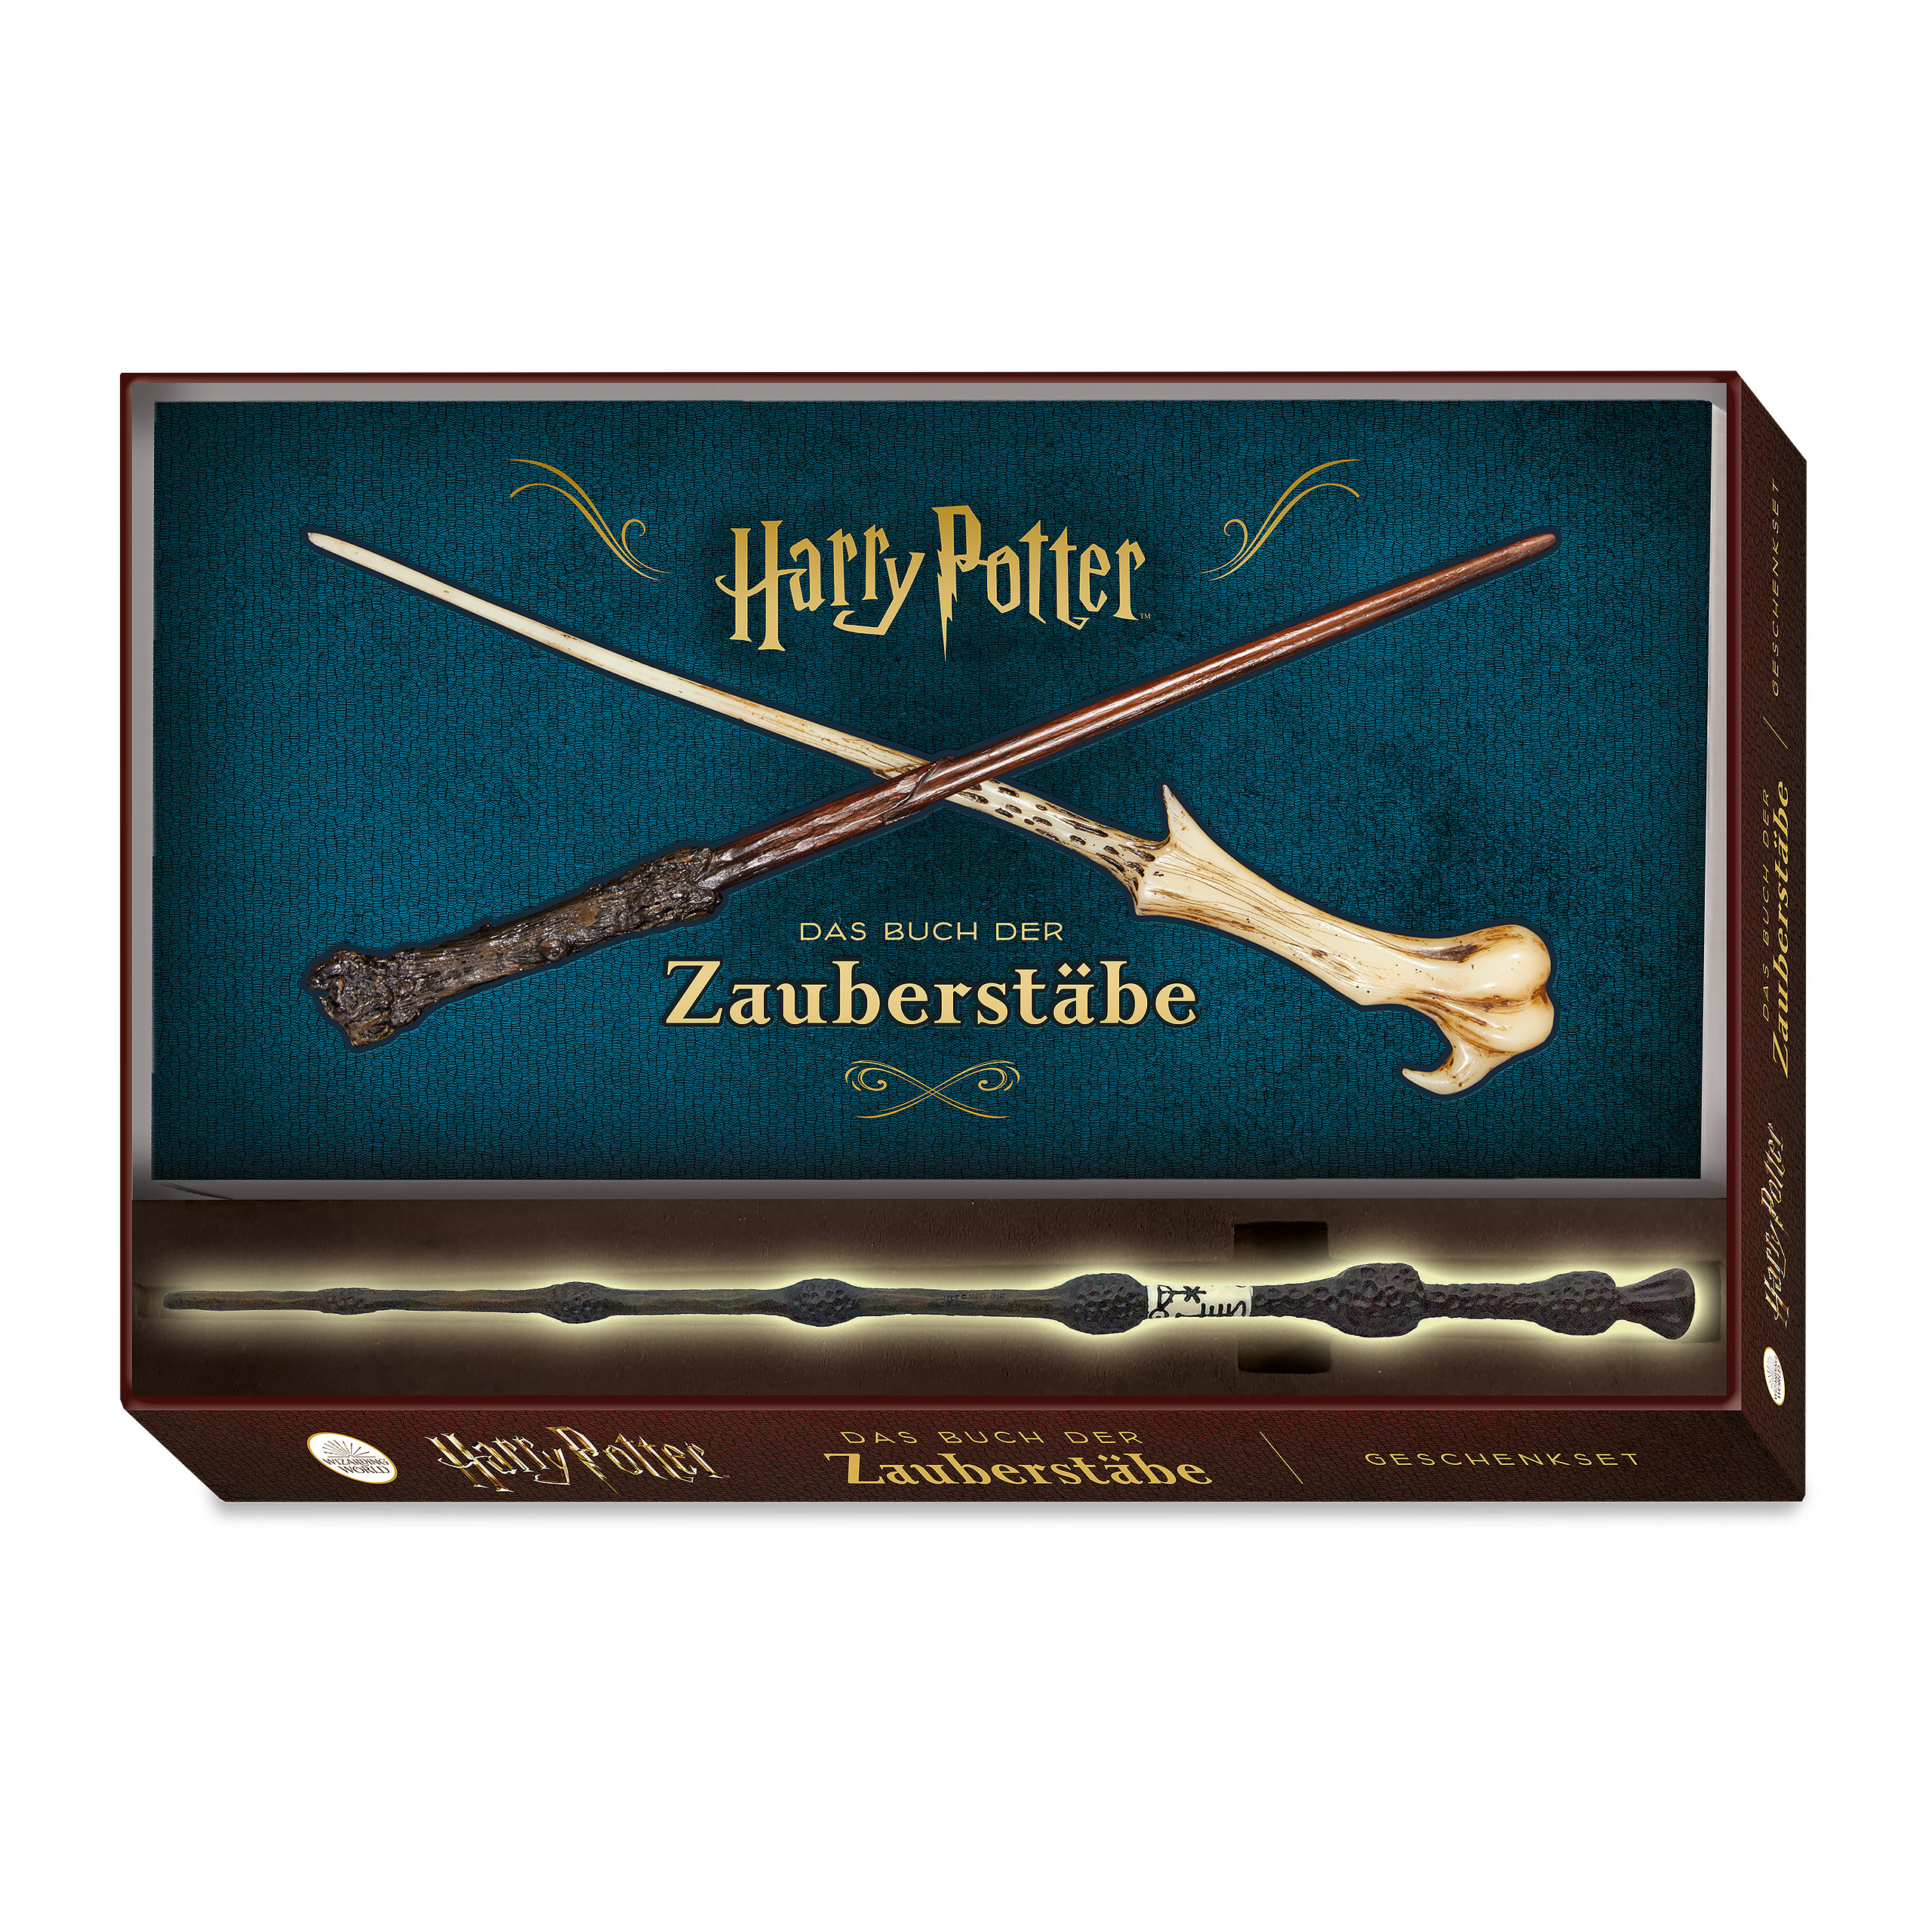 Harry Potter - The Book of Wands Gift Box with Book and Wand